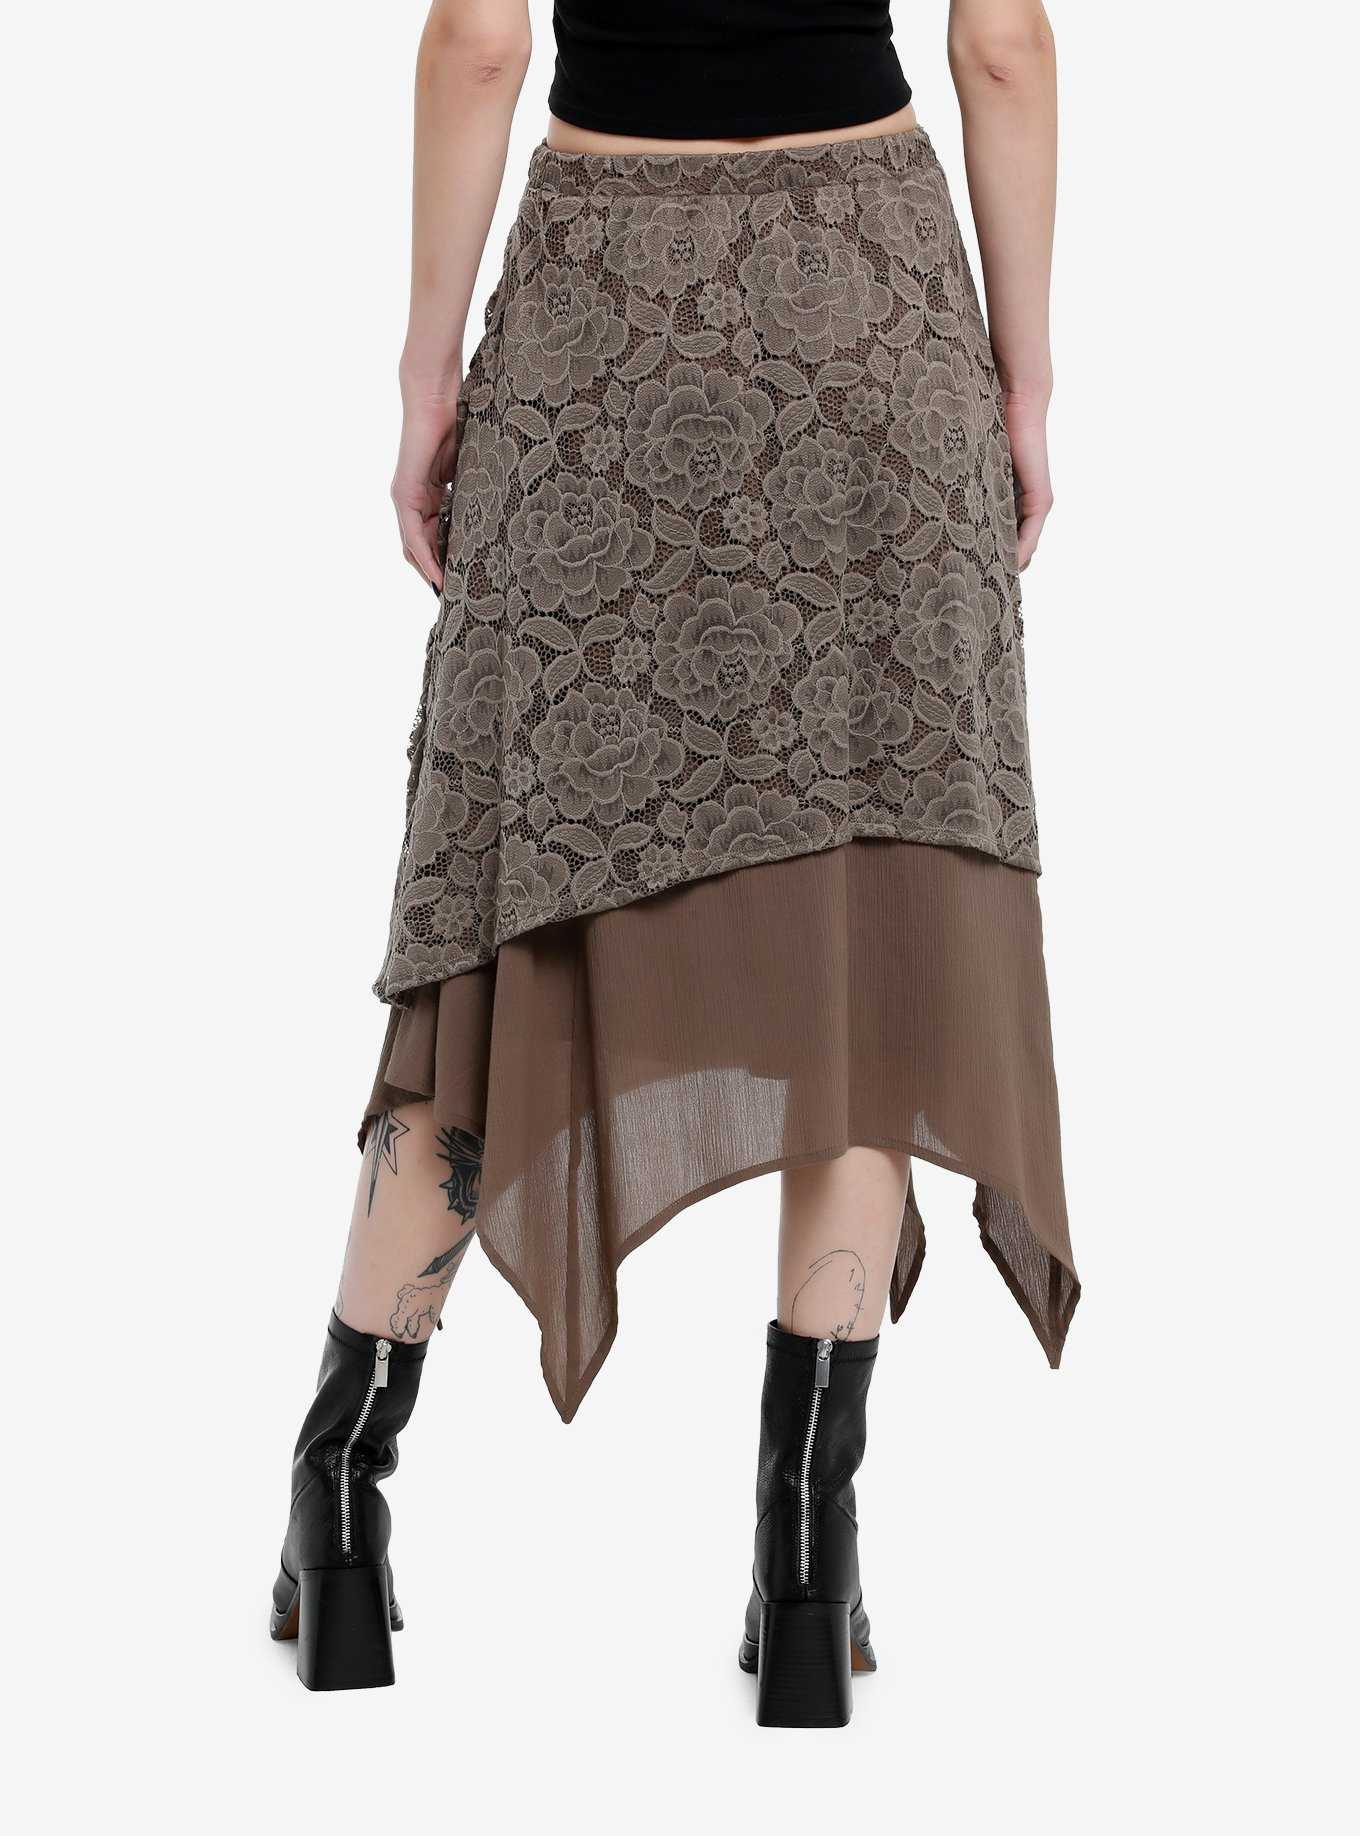 Thorn & Fable Brown Lace Ruched Hanky Hem Midi Skirt, , hi-res